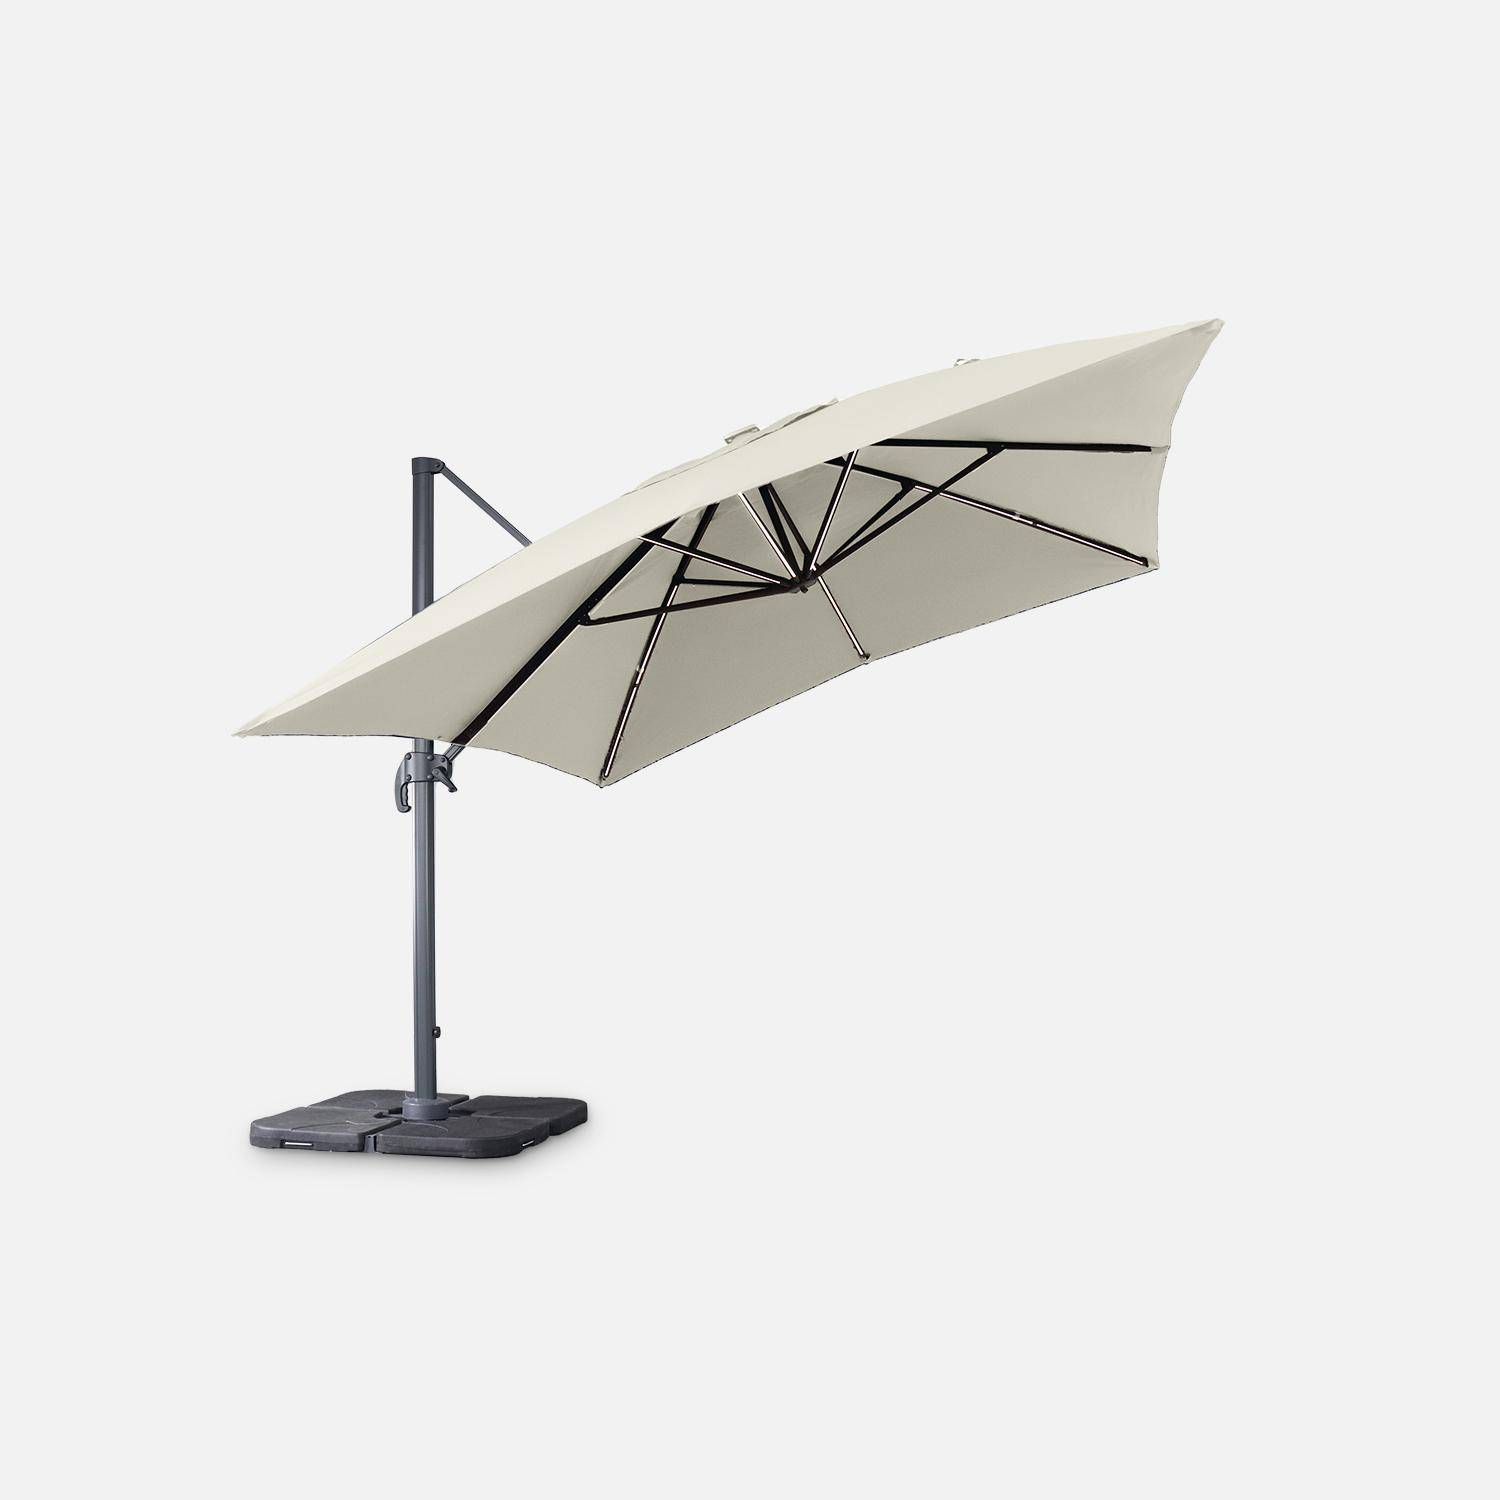 Premium quality rectangular 3x4m cantilever parasol with solar-powered integrated LED lights - Cantilever parasol, tiltable, foldable with 360° rotation, solar charging, cover included - Luce - Beige,sweeek,Photo3